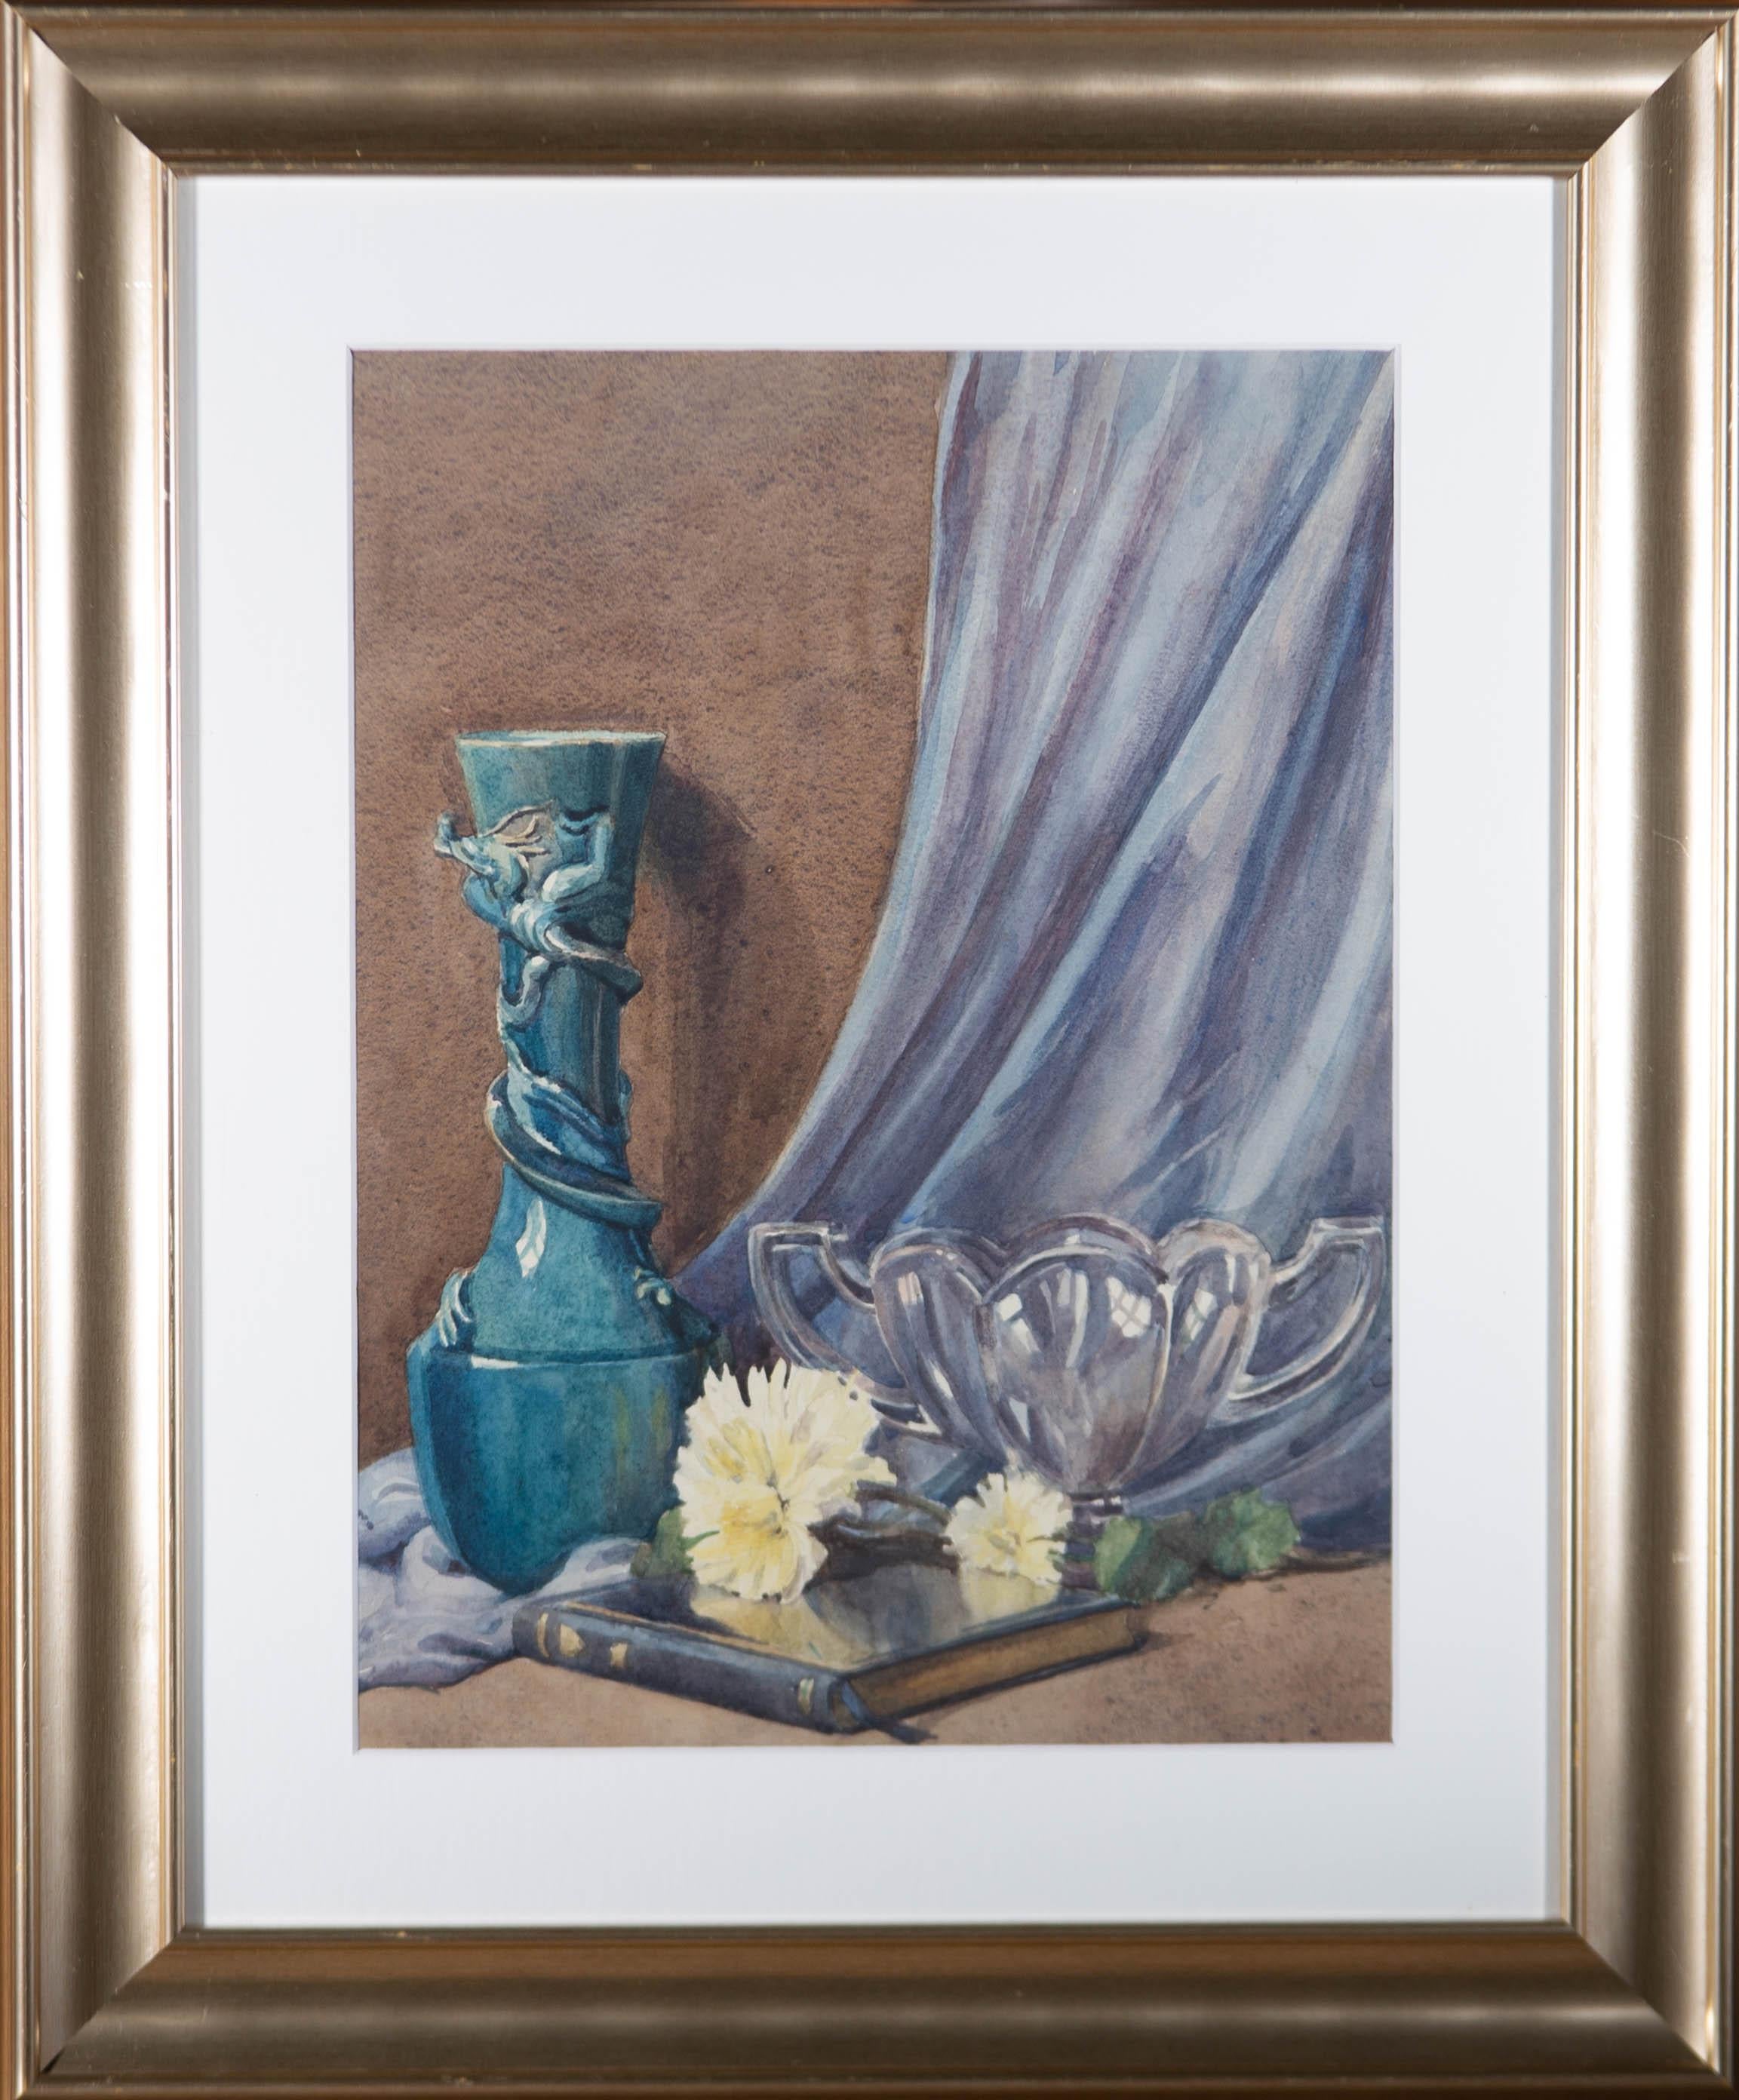 A delightful still life study depicting a blue vase set against a material backdrop, with glassware and spring flowers resting on a book. Well presented in a contemporary frame and white card mount. The signature and date have been cropped and fixed